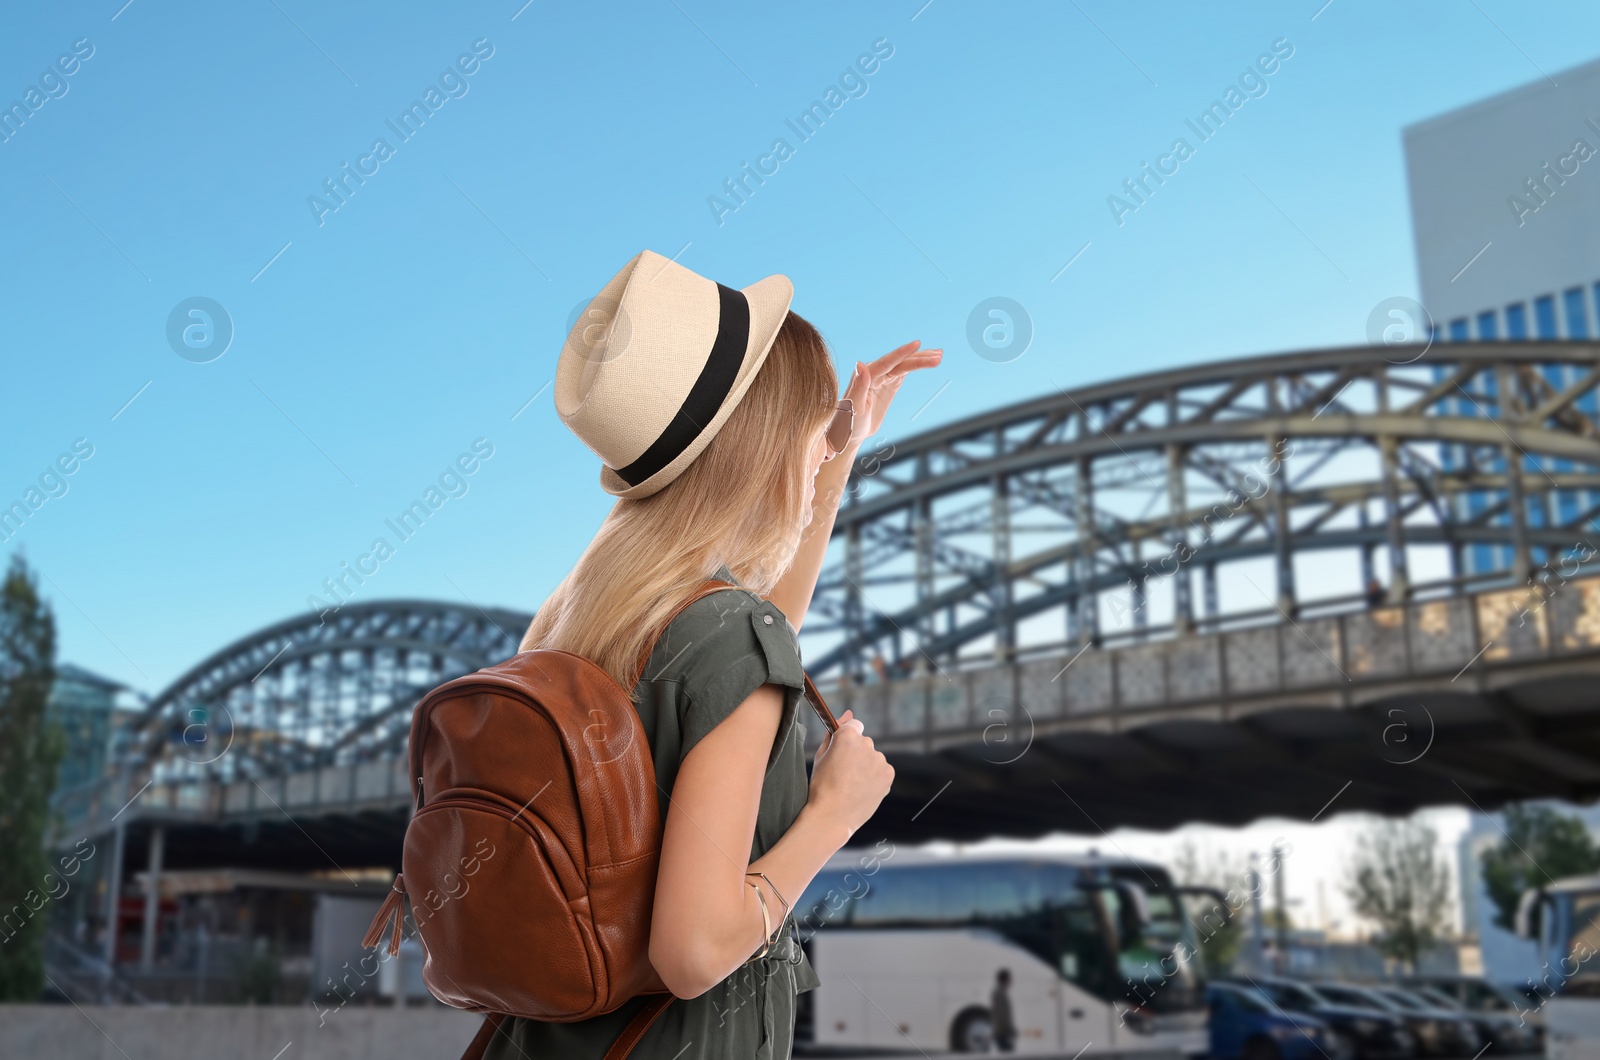 Image of Traveler with backpack in foreign city during summer vacation